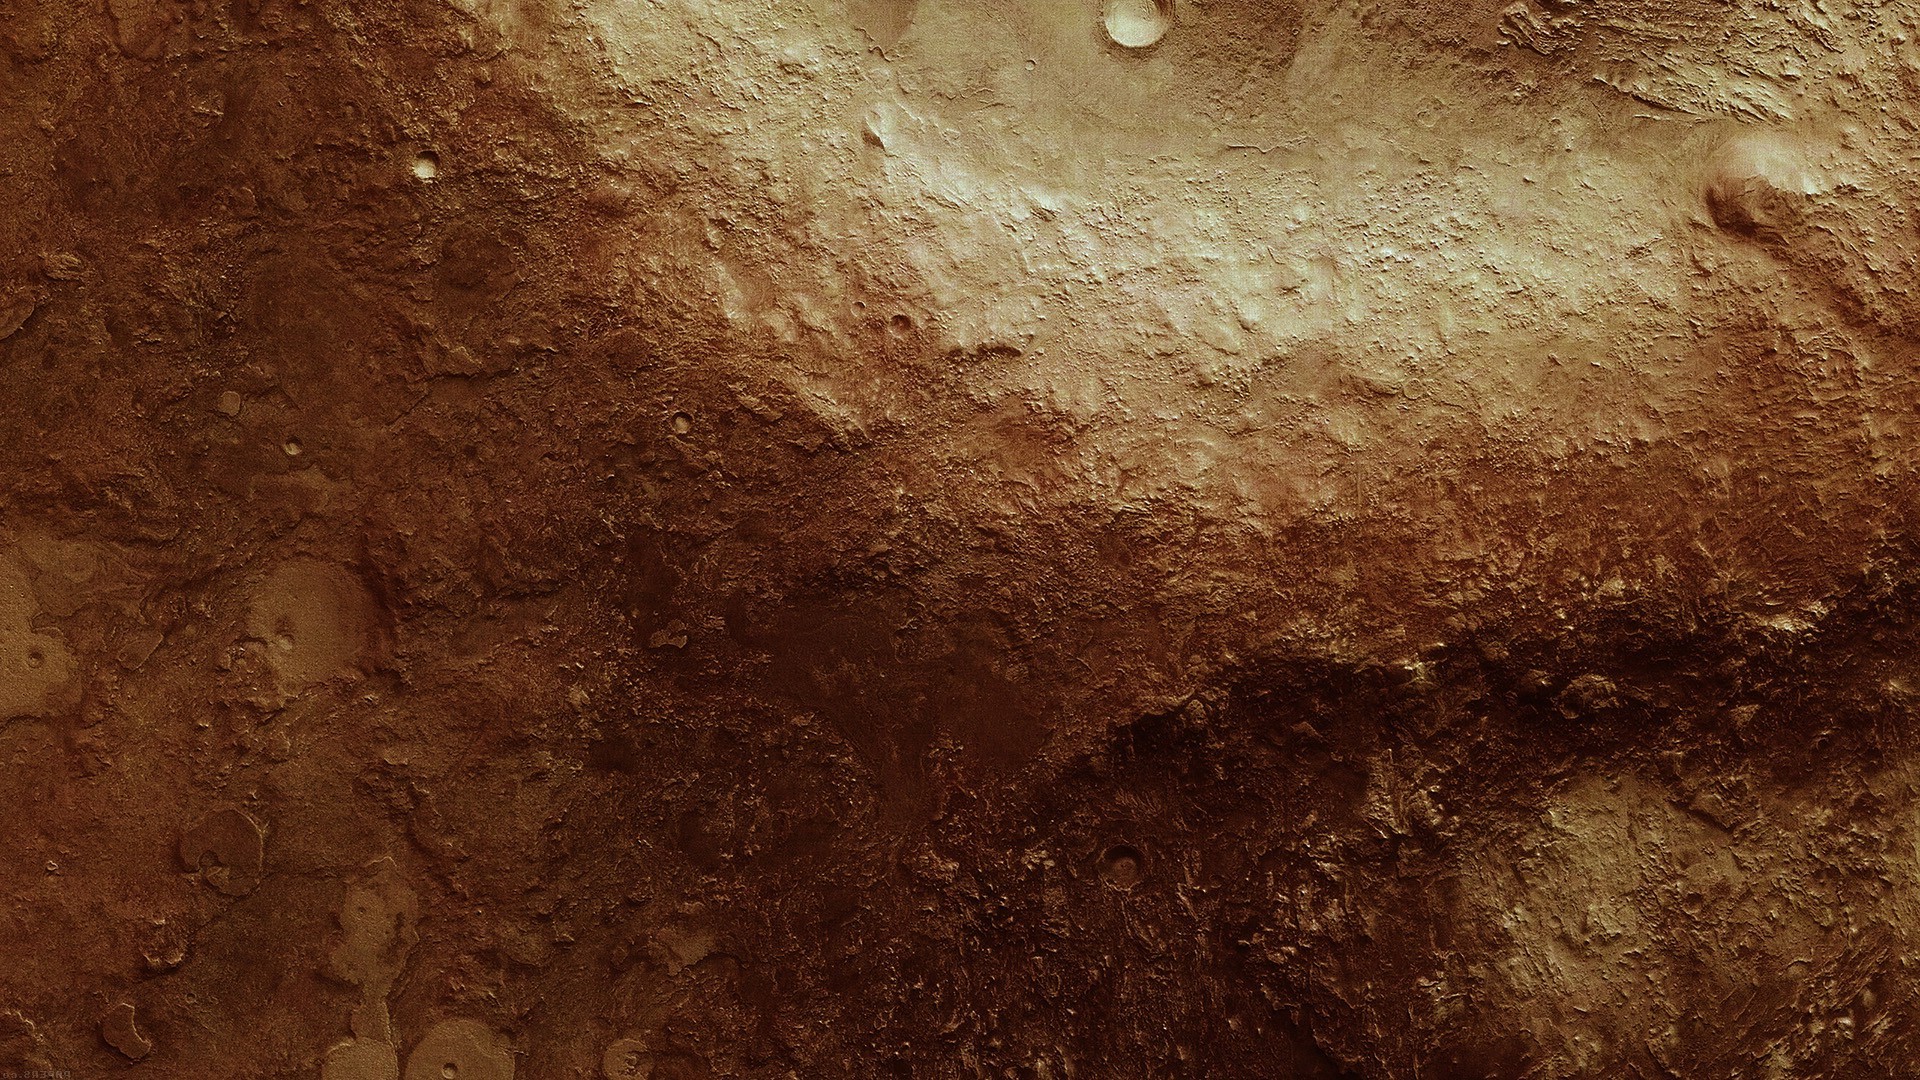 asteroid, Space, Texture, Brown Wallpaper